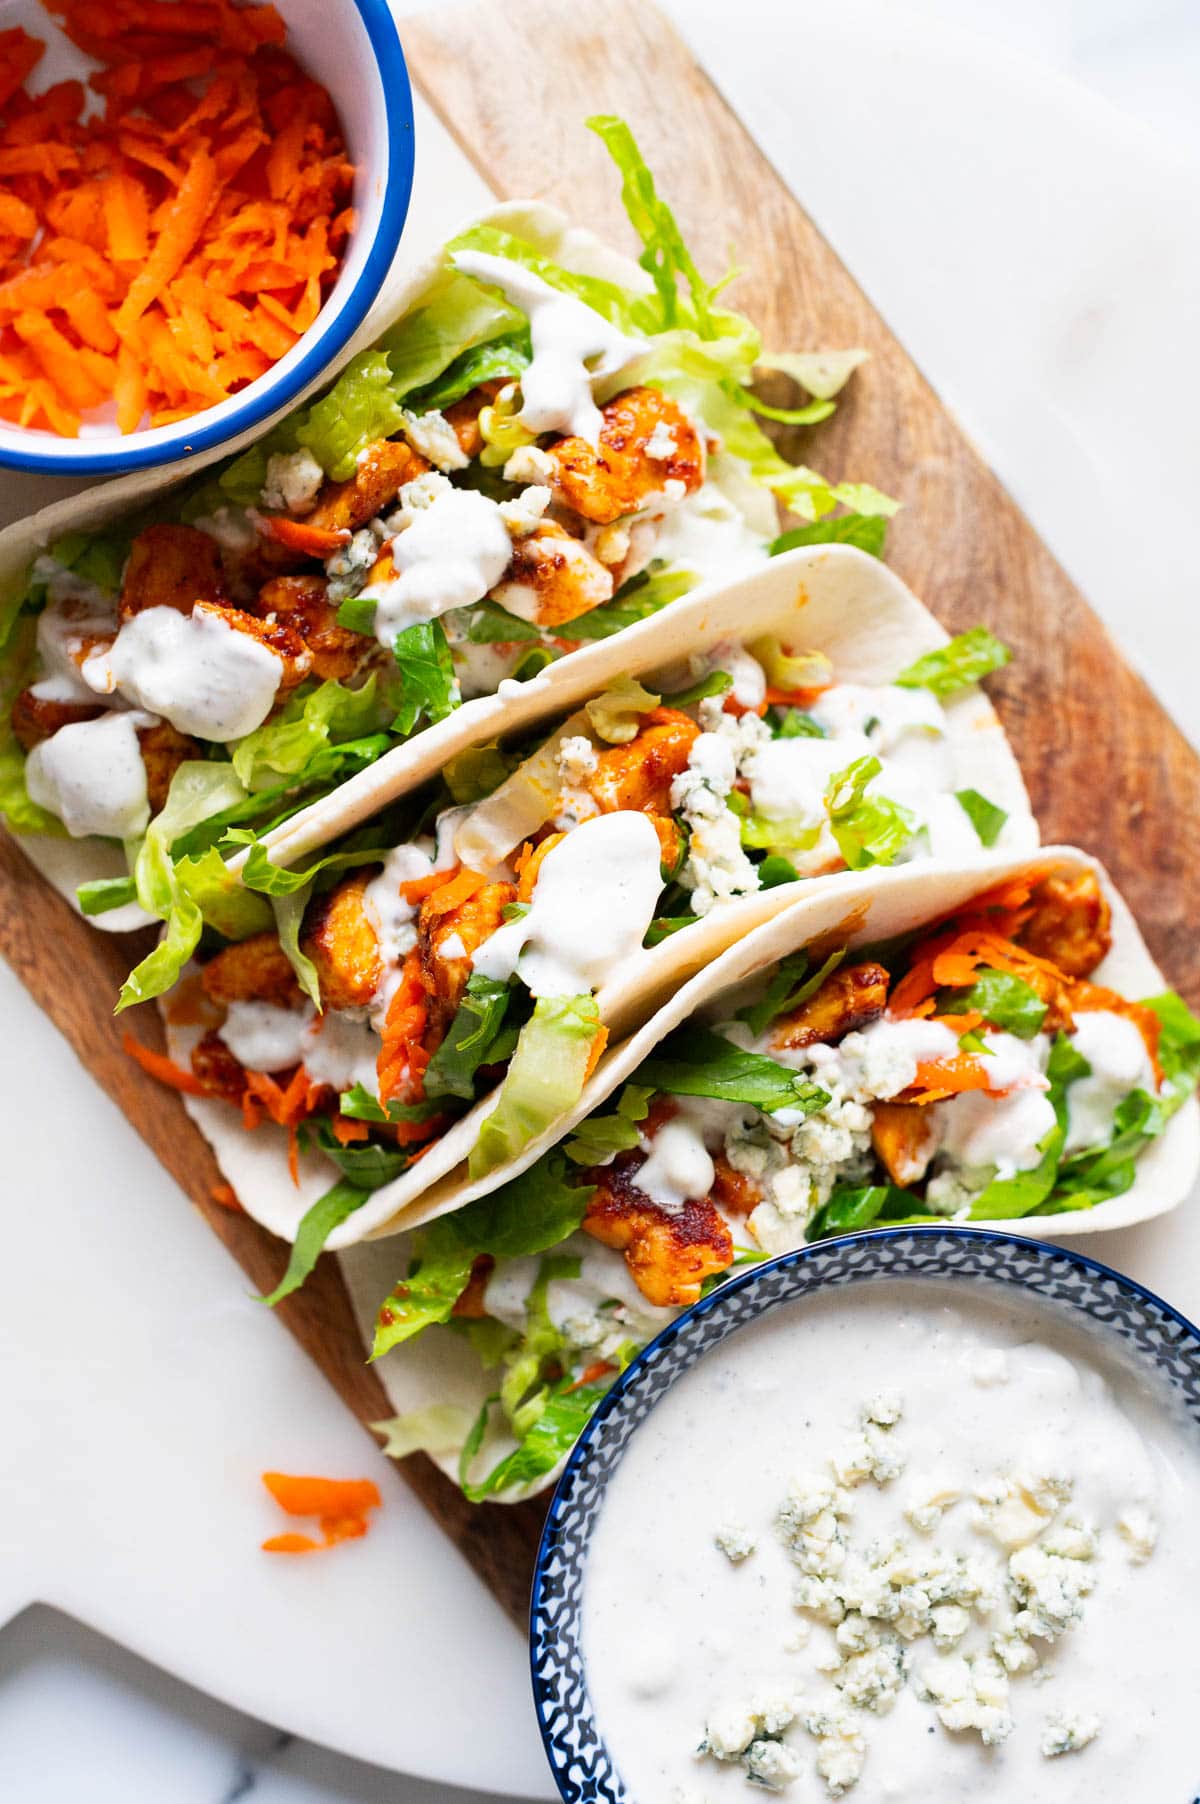 Buffalo chicken tacos with shredded carrots, lettuce and blue cheese dressing.